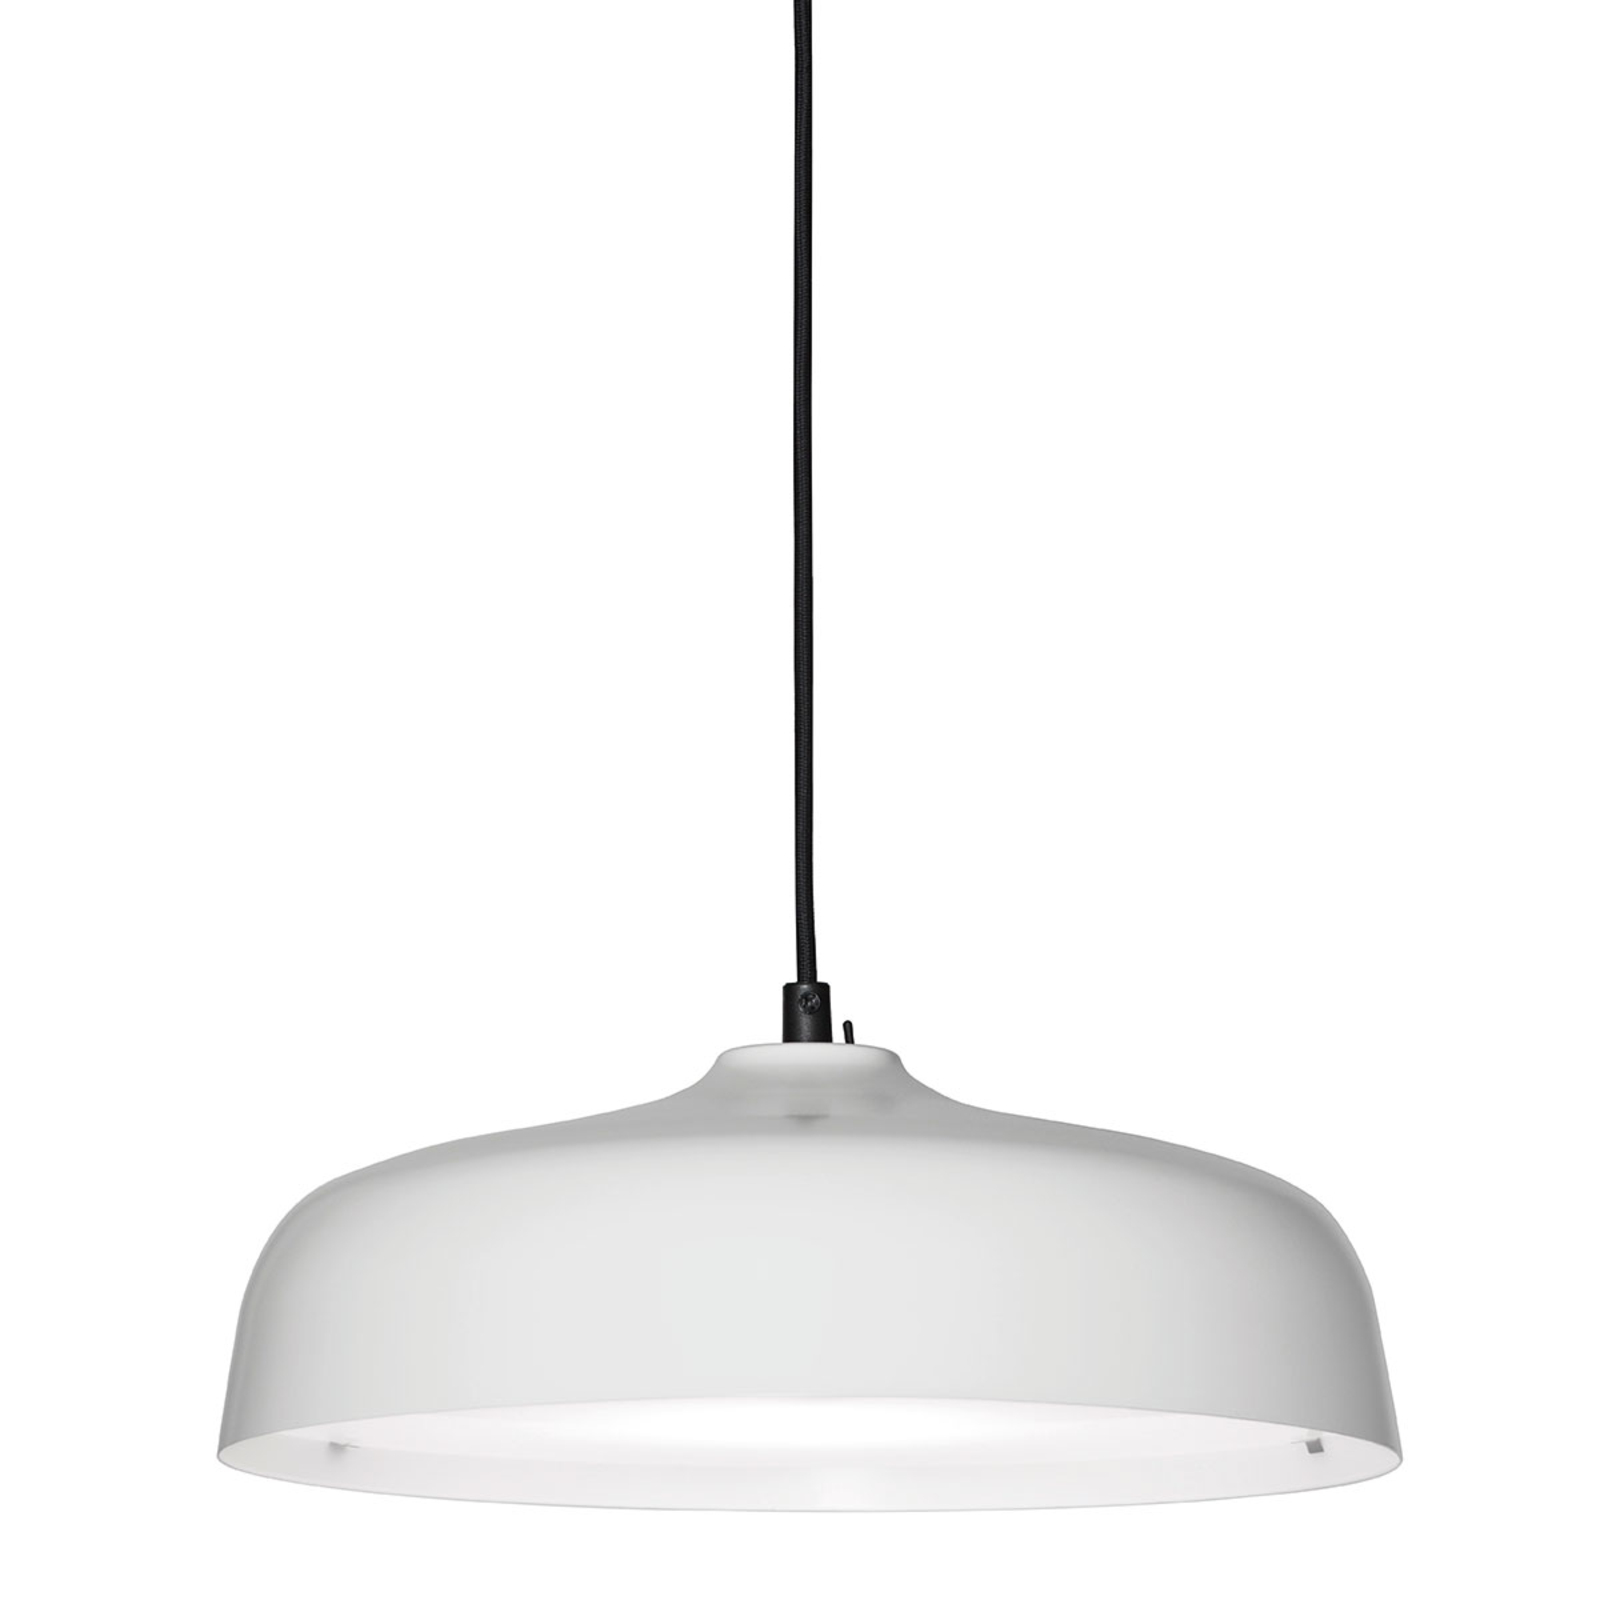 Innolux Candeo Air LED pendant light white